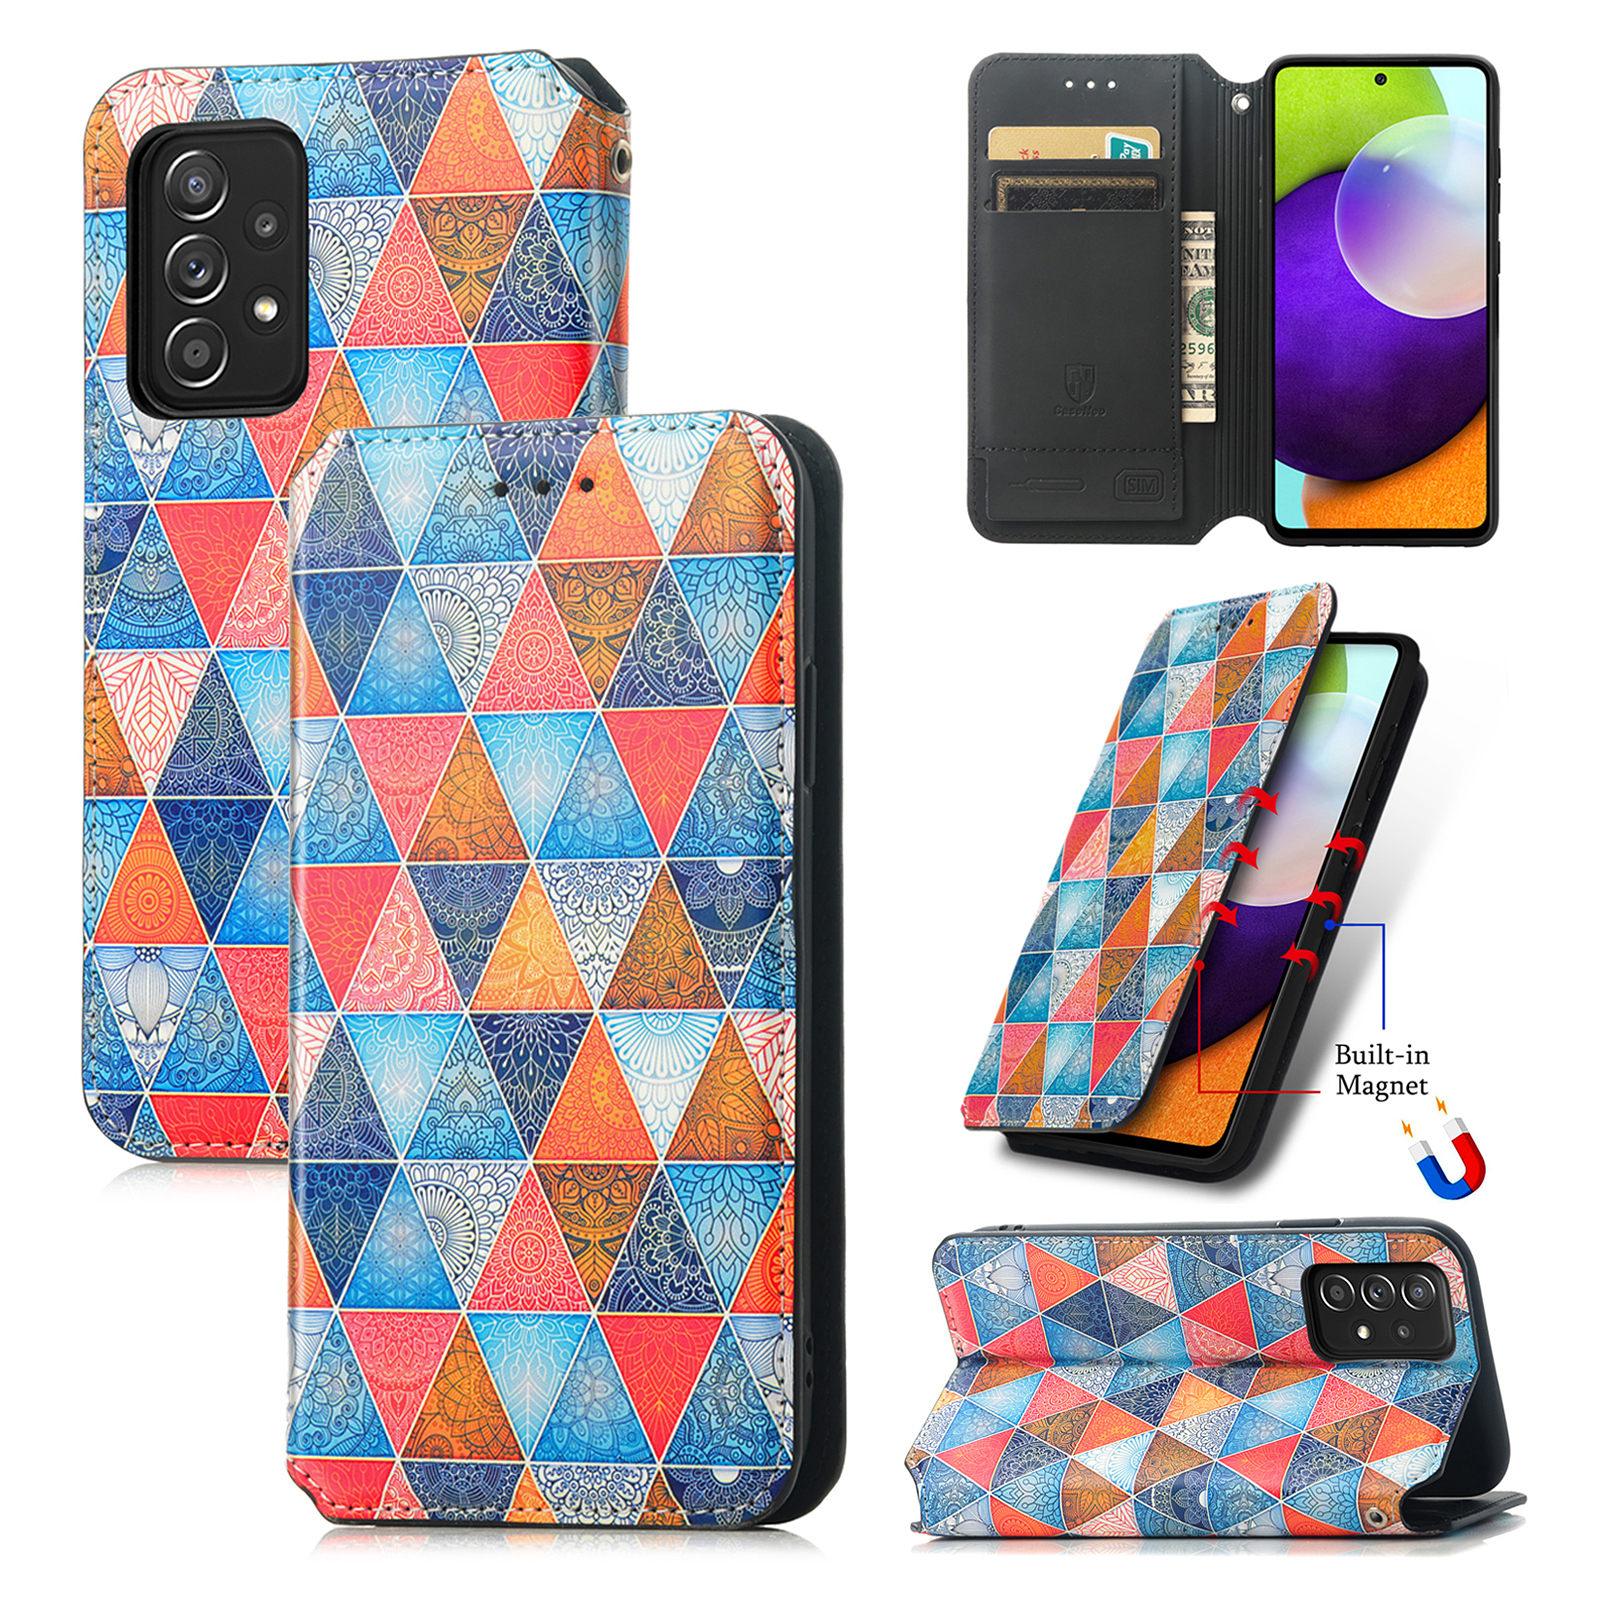 Case for Samsung Galaxy S21 Plus Case, Galaxy S21 Plus Case Wallet Case PU Leather and Hard PC RFID Blocking Slim Durable Protective Phone Case Cover For Samsung Galaxy S21+,Mandala - image 1 of 9